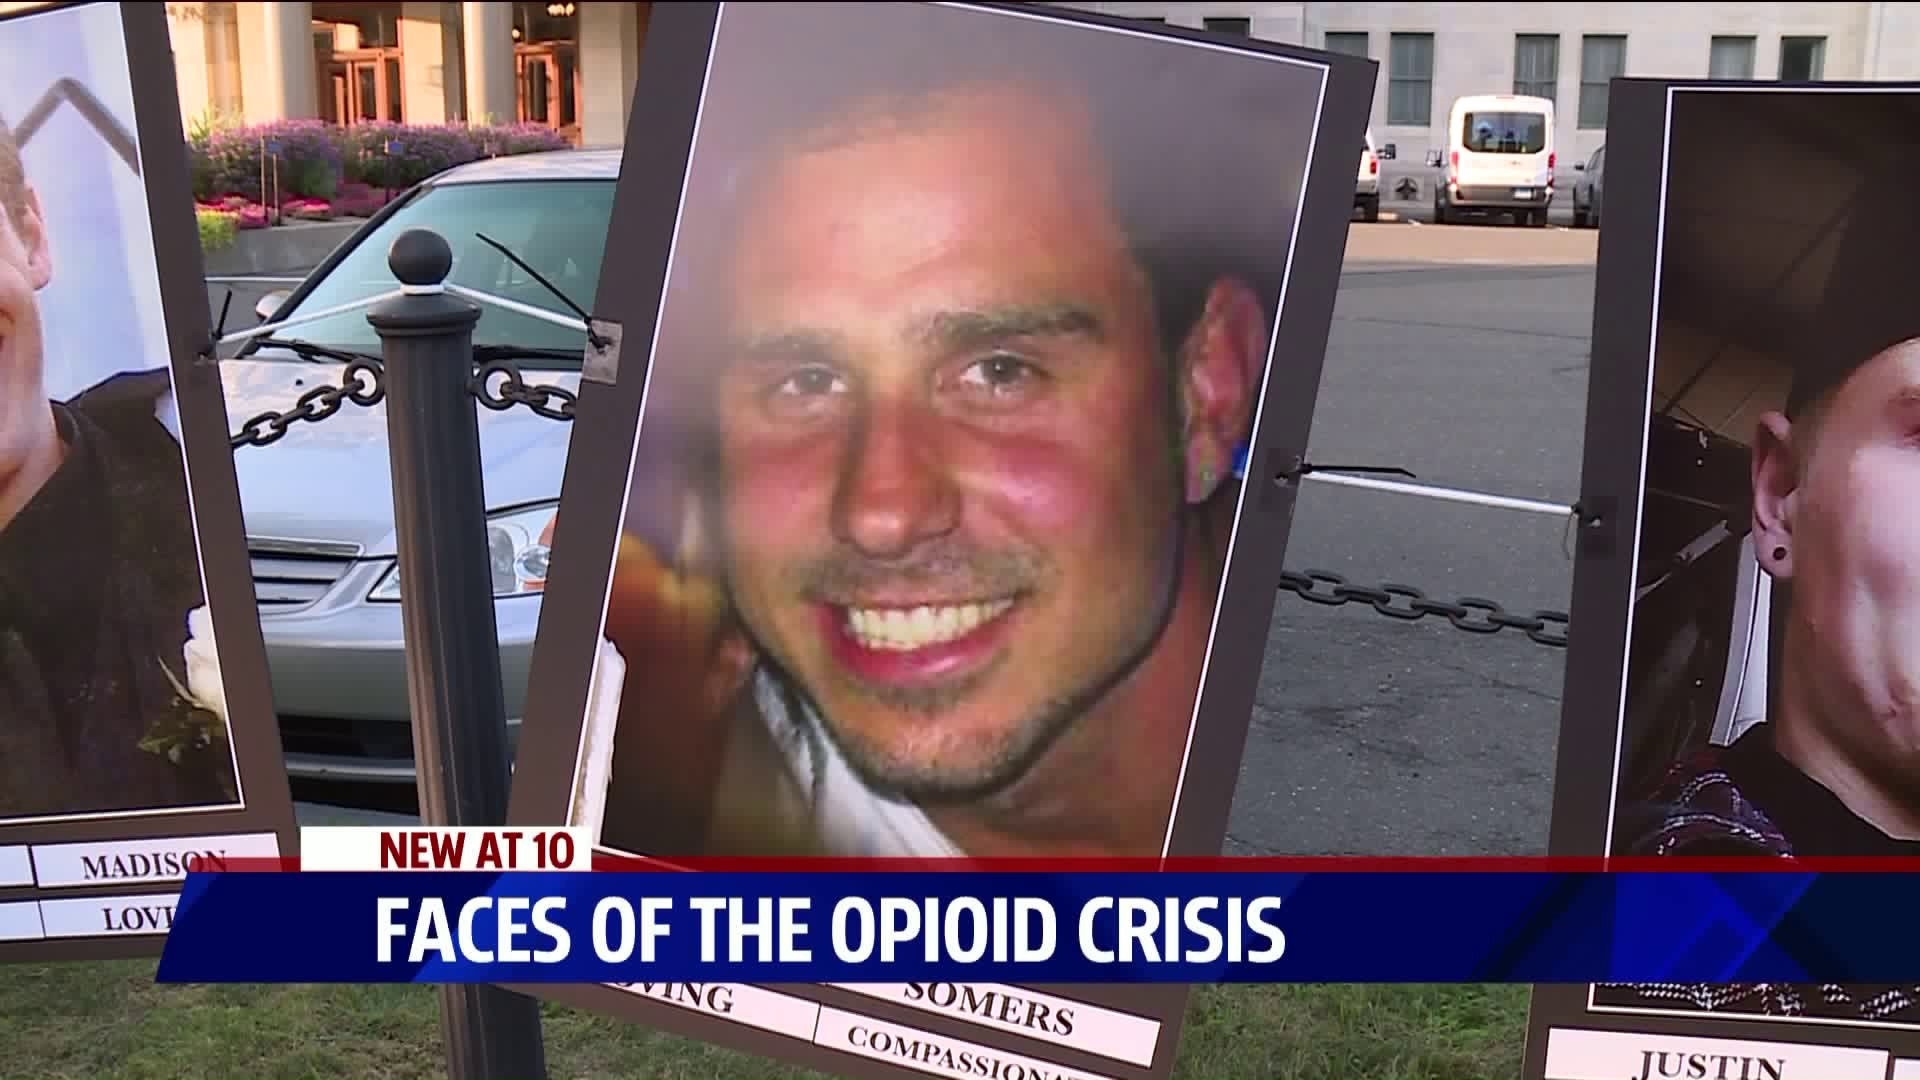 Remembering the victims of opioid abuse